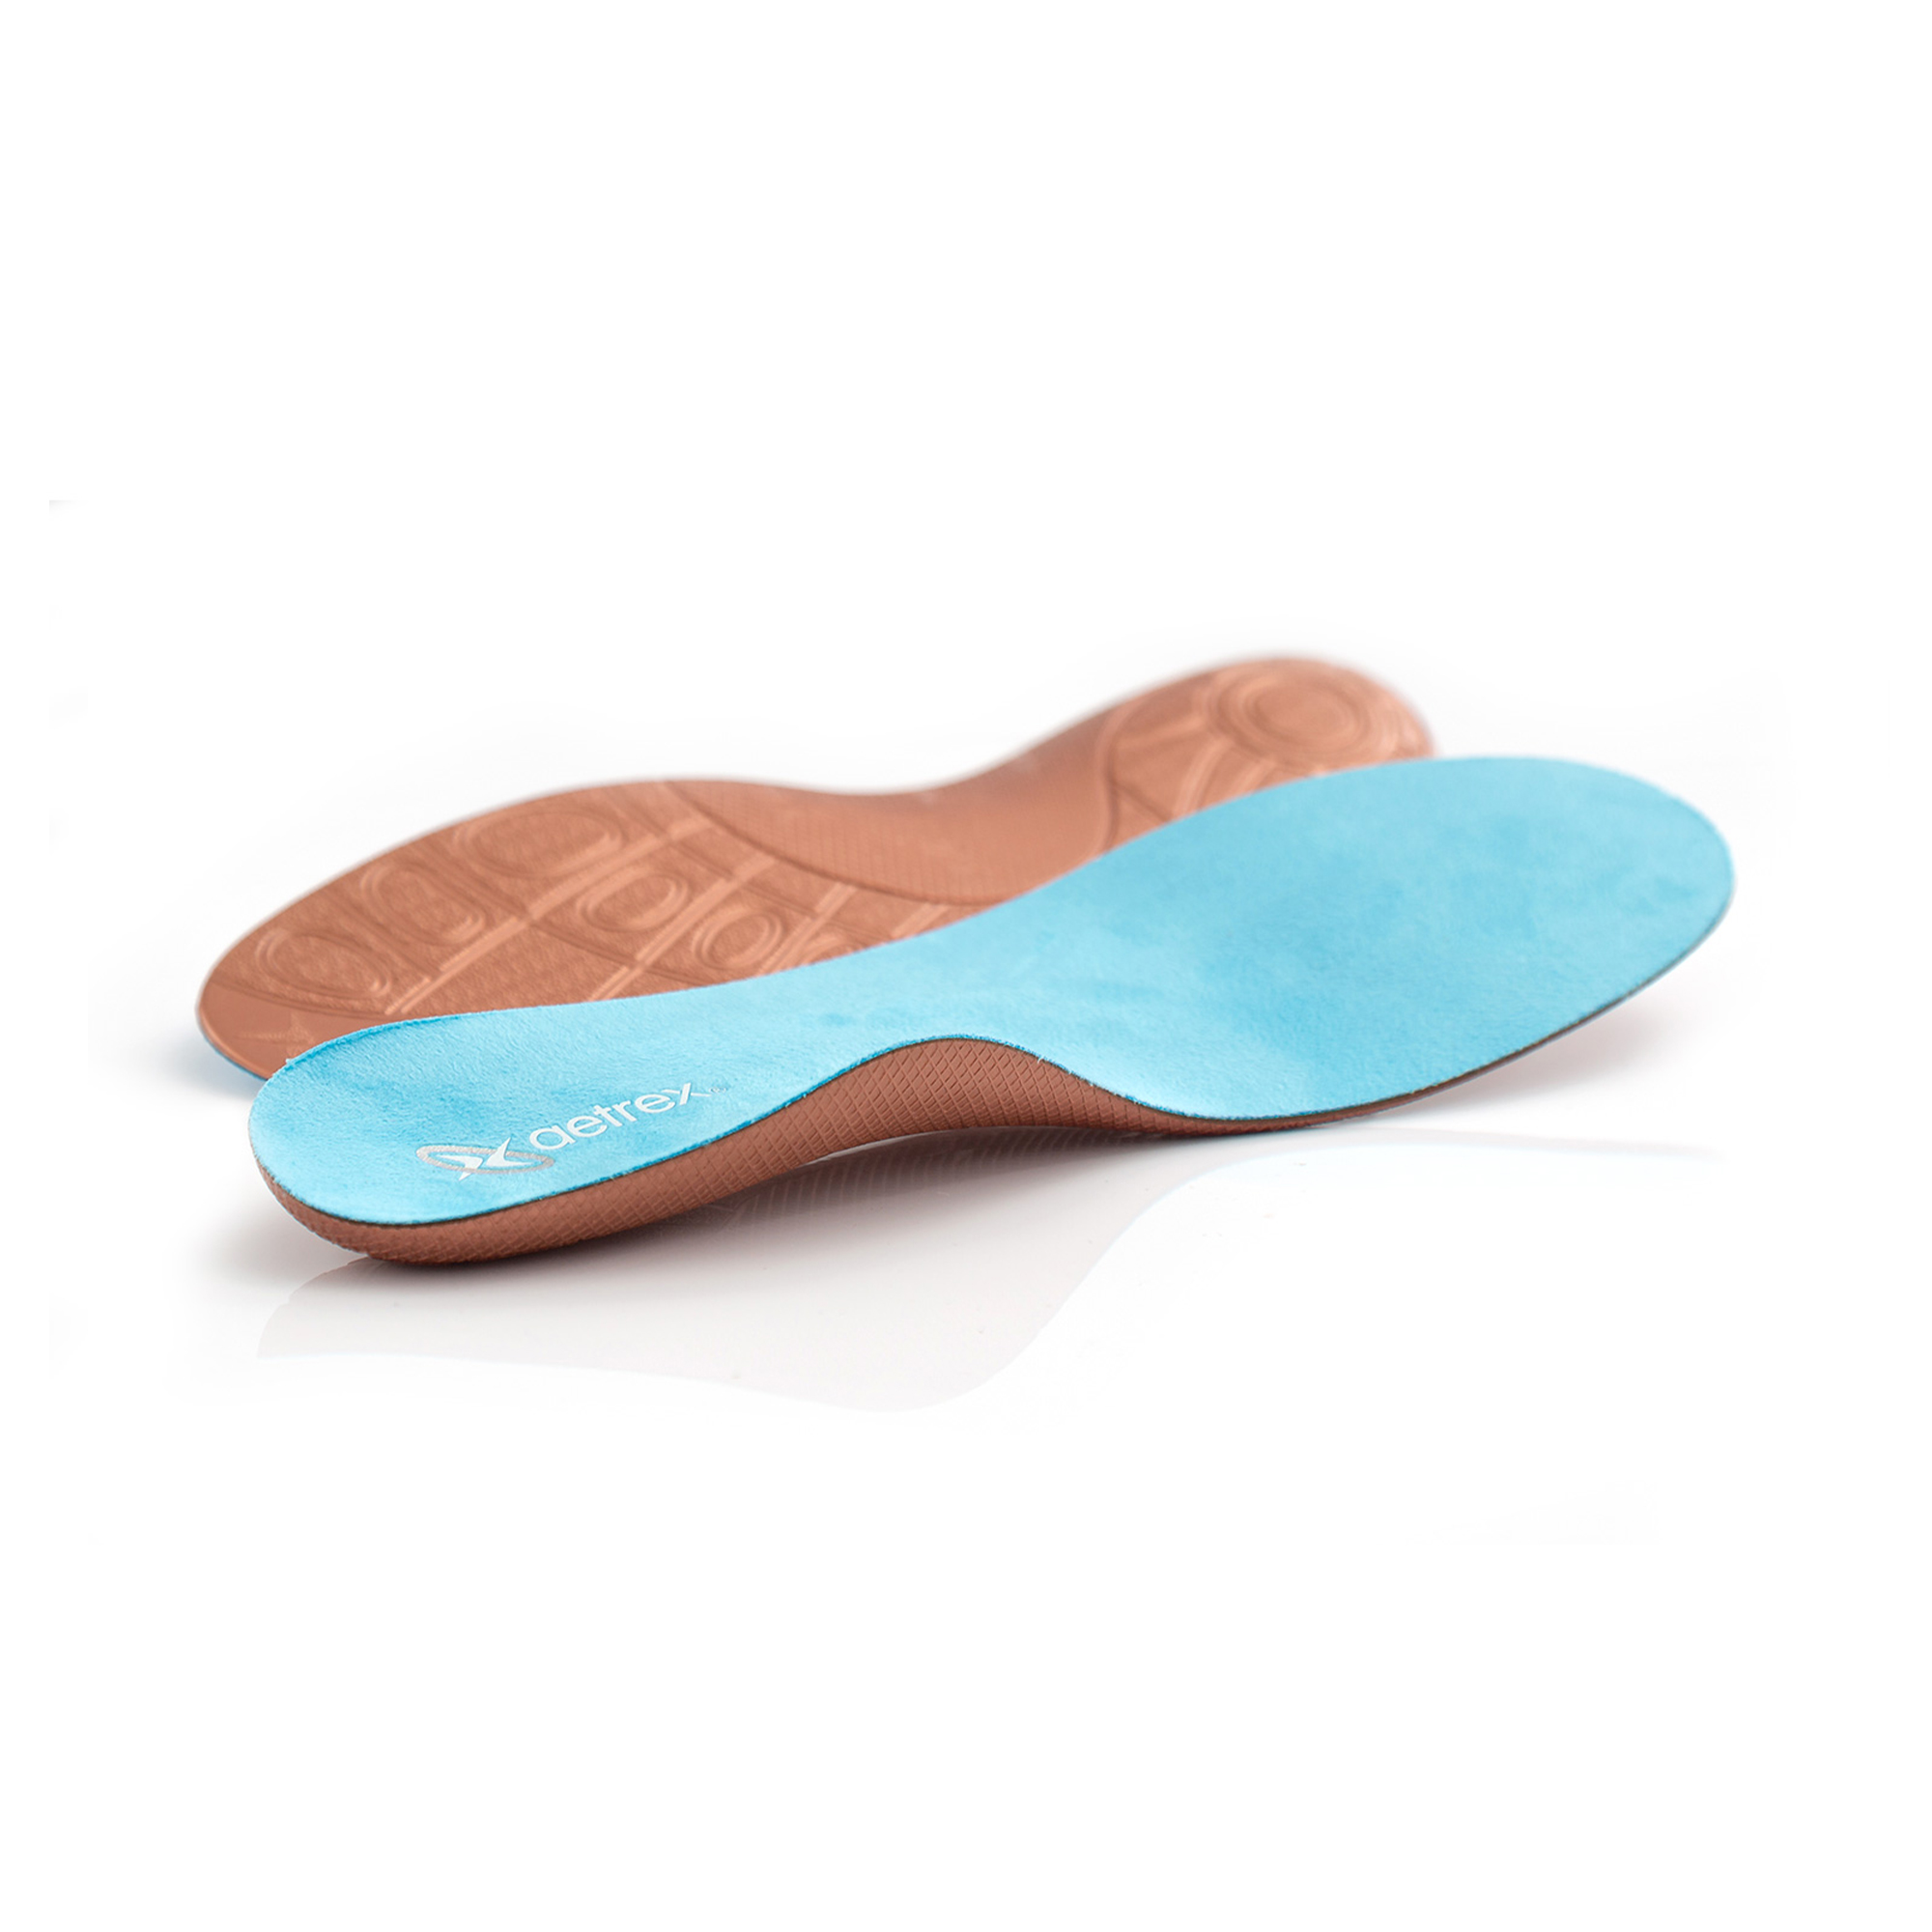 mens shoes with removable insoles for orthotics uk